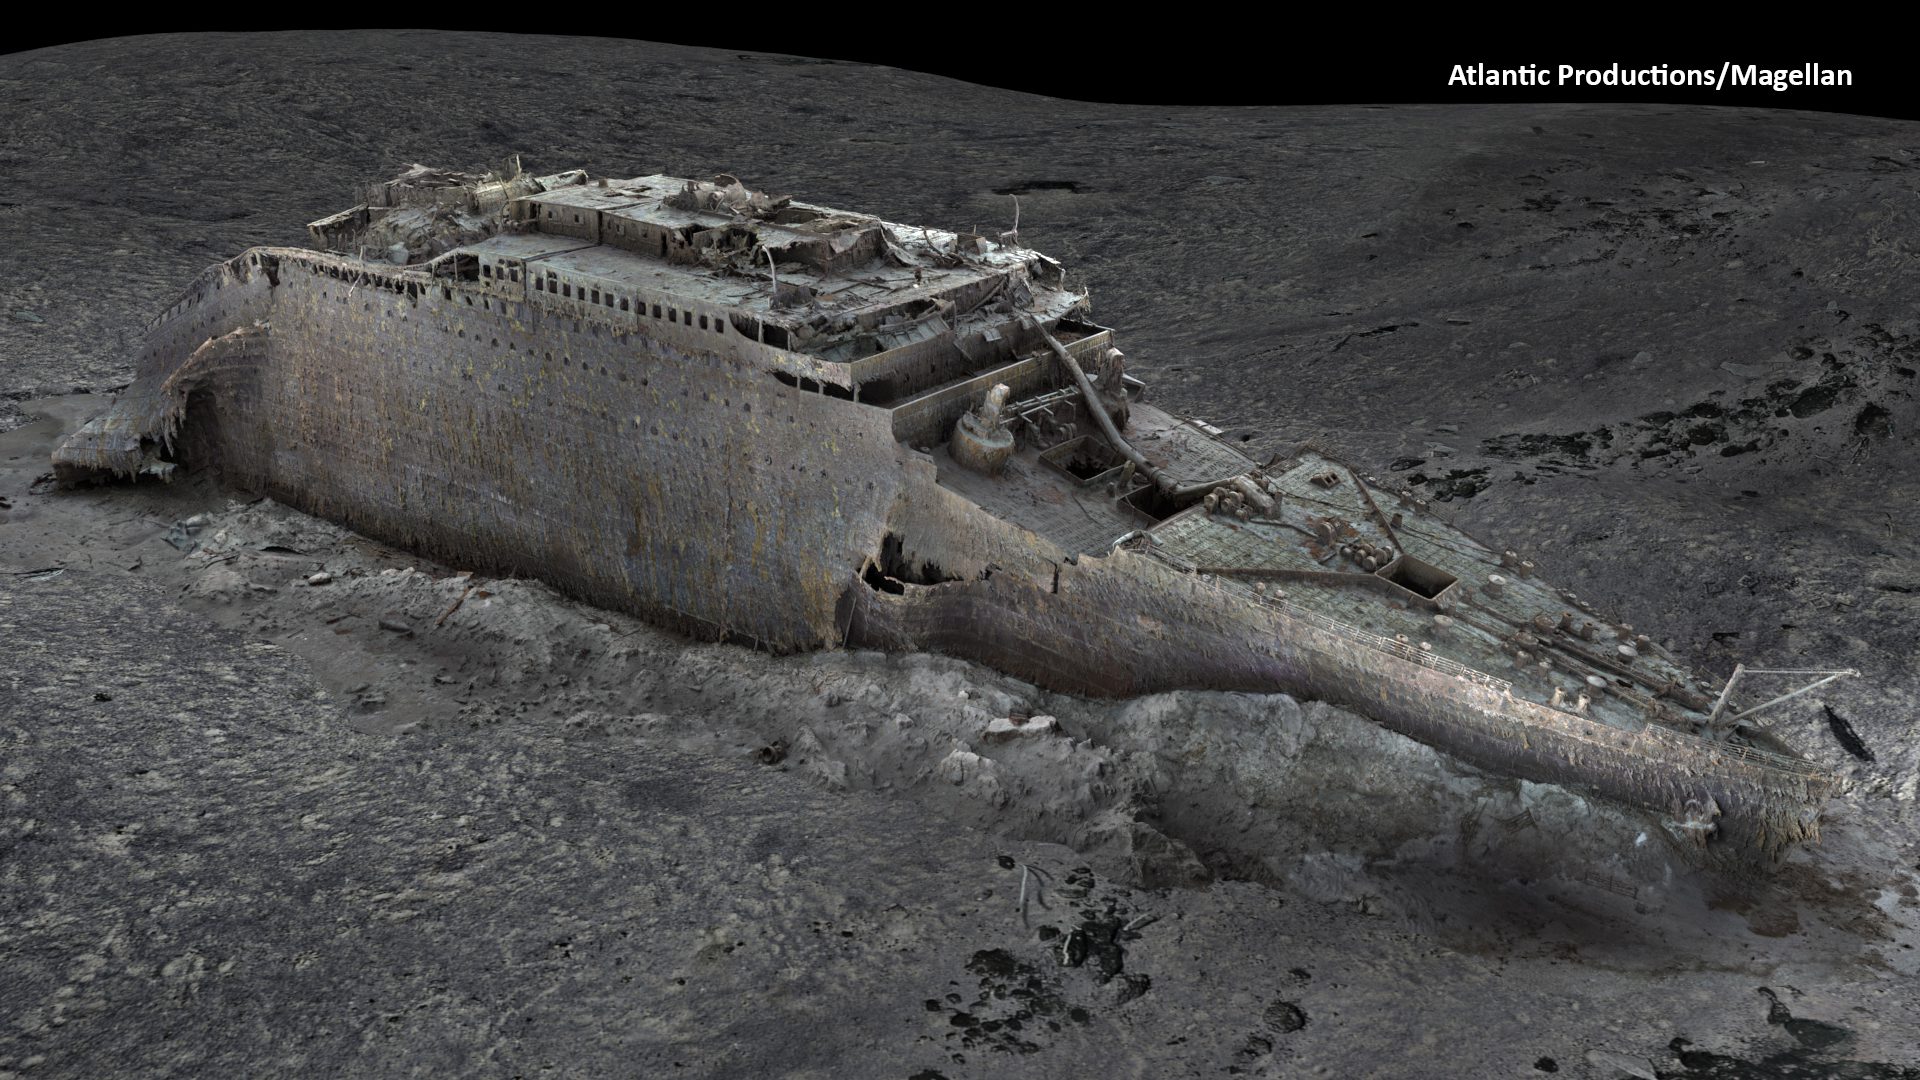 Titanic Scan Reveals Amazing New Details of Historic Wreck